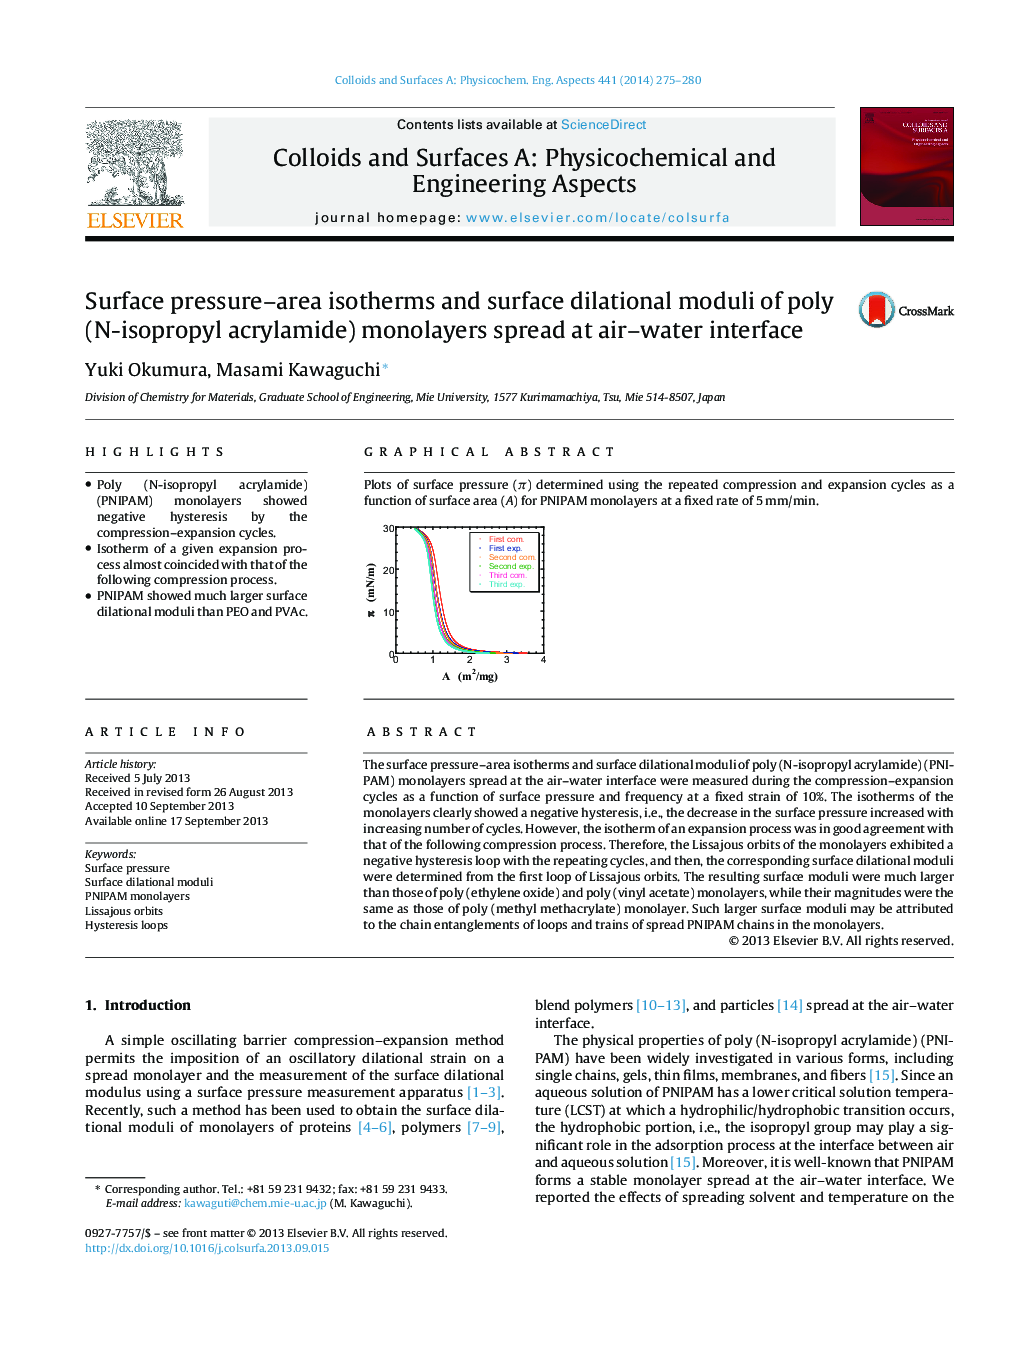 Surface pressure-area isotherms and surface dilational moduli of poly (N-isopropyl acrylamide) monolayers spread at air-water interface